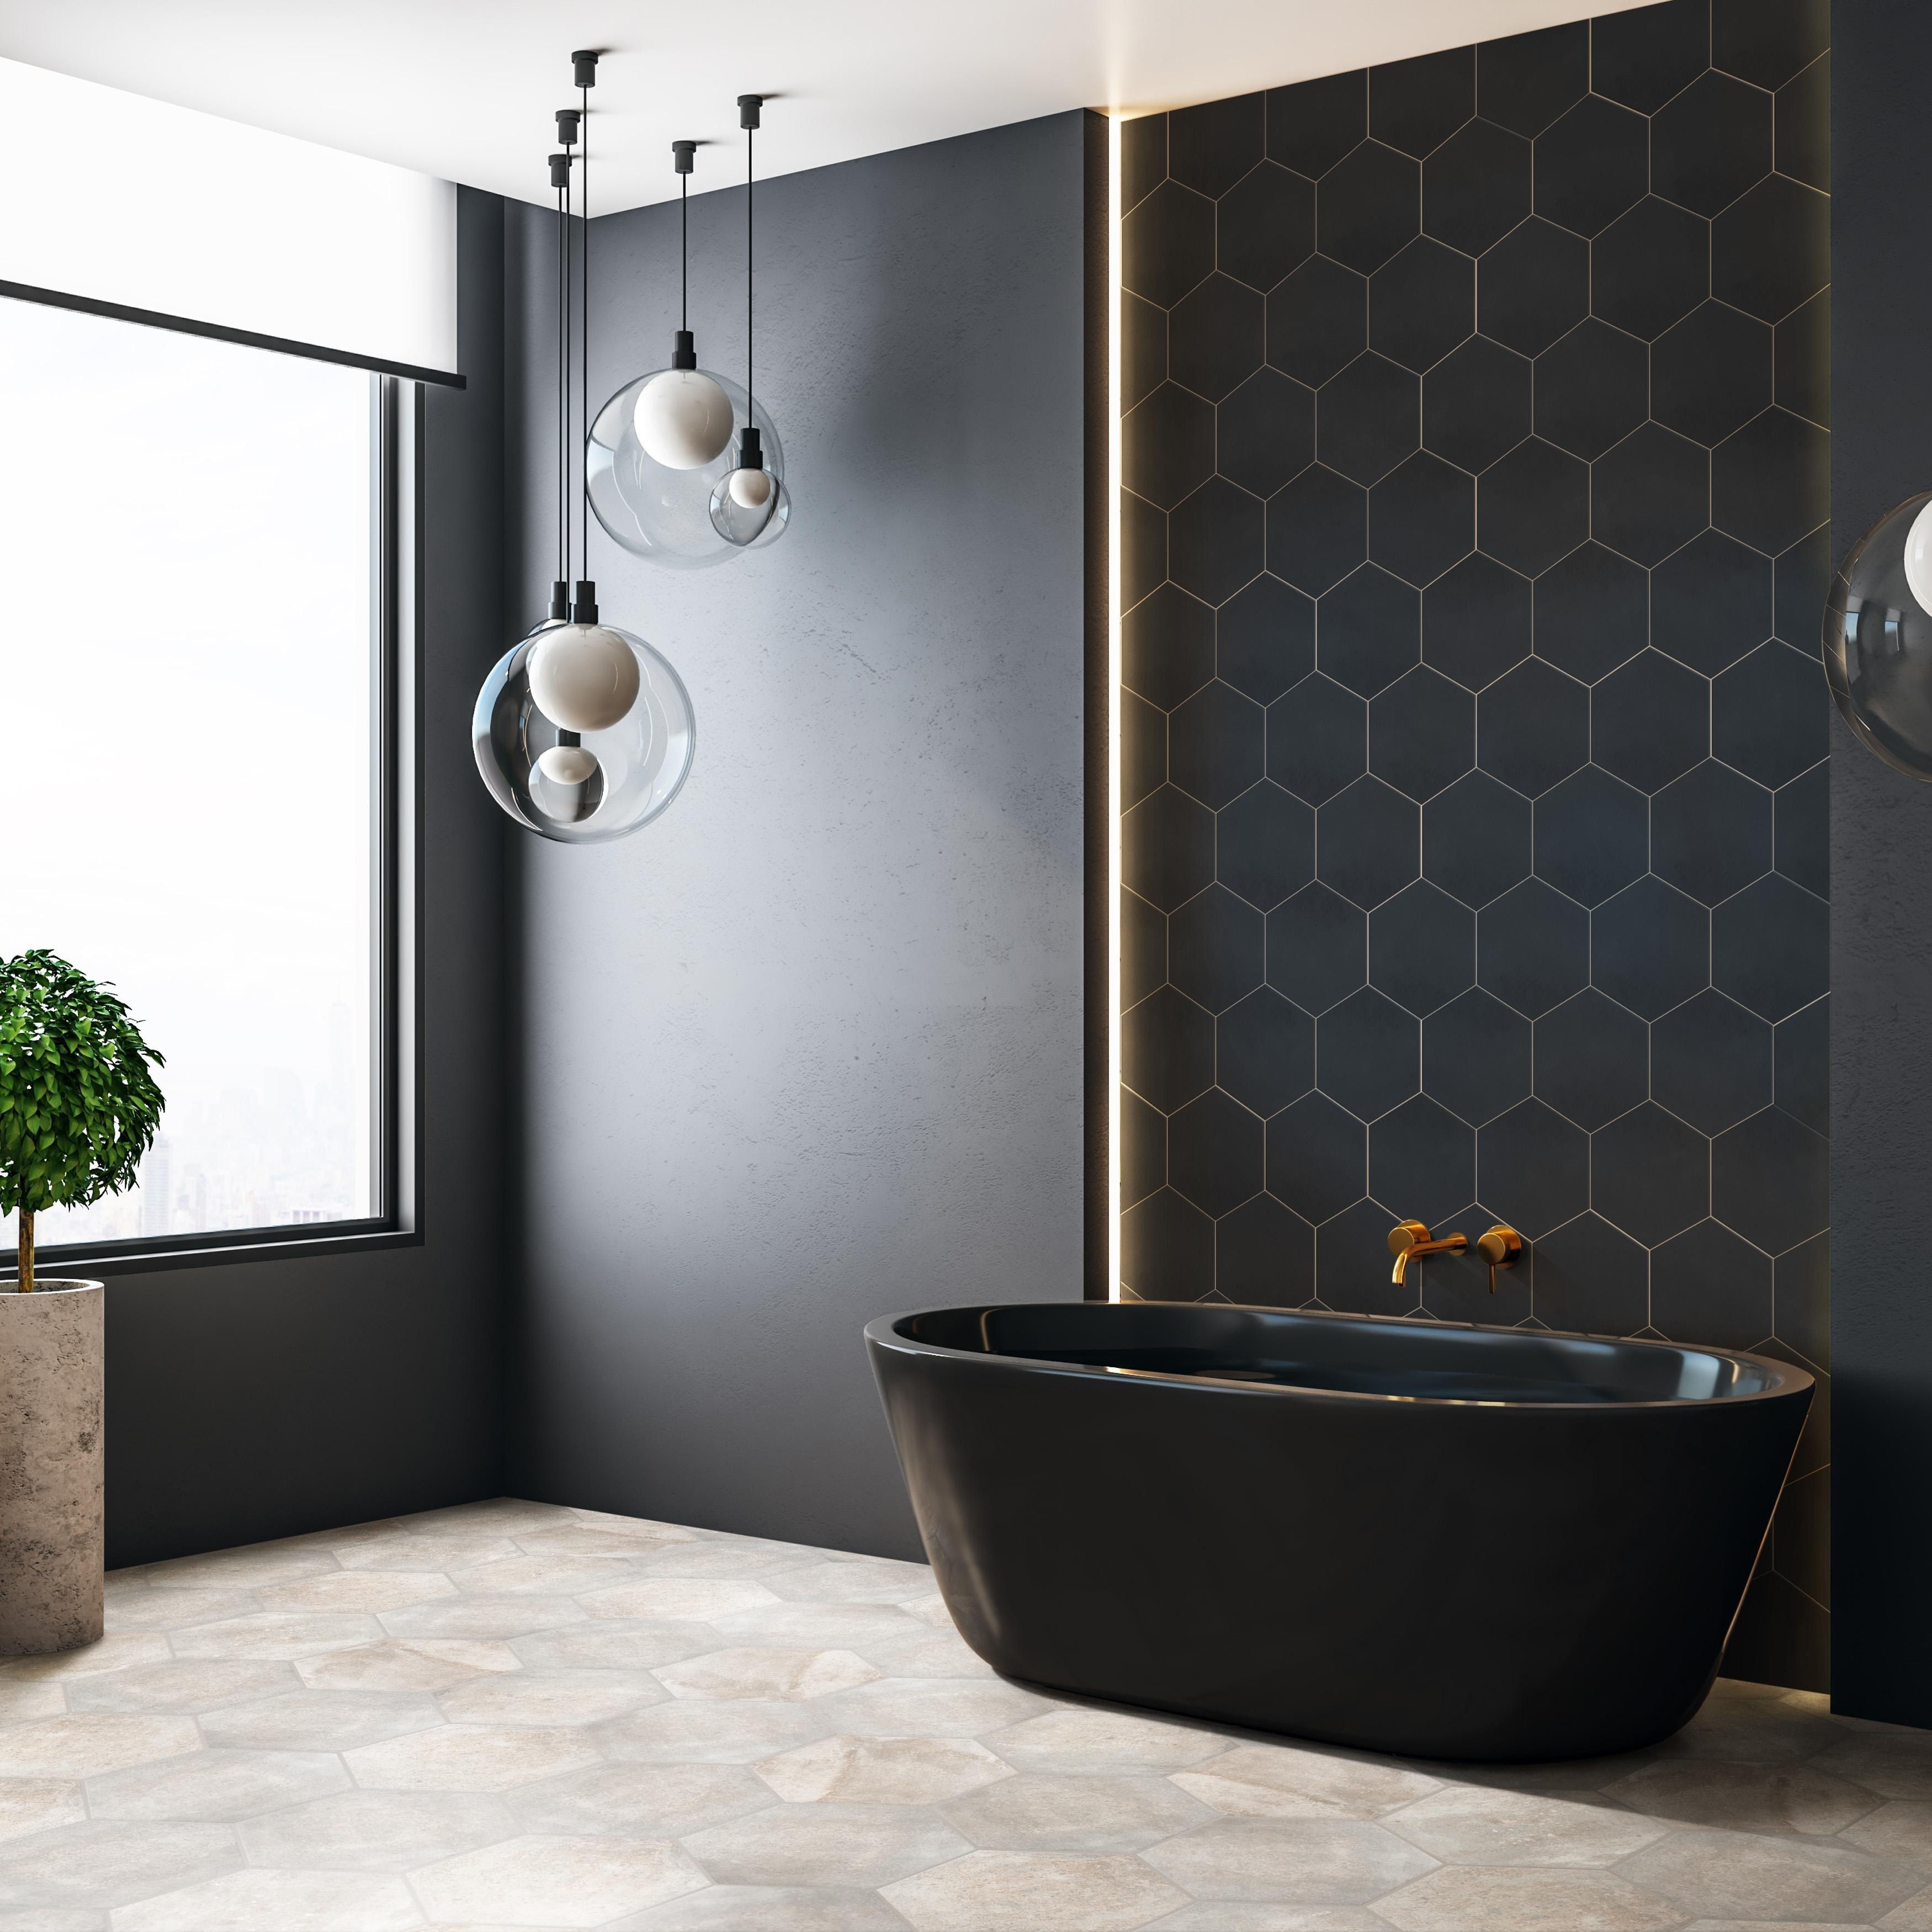 https://ak1.ostkcdn.com/images/products/is/images/direct/ebf15554e7967a067d3bb8e4542291b2797ef177/SomerTile-Apini-Hex-Matte-Black-9%22-x-11%22-Porcelain-Floor-and-Wall-Tile.jpg